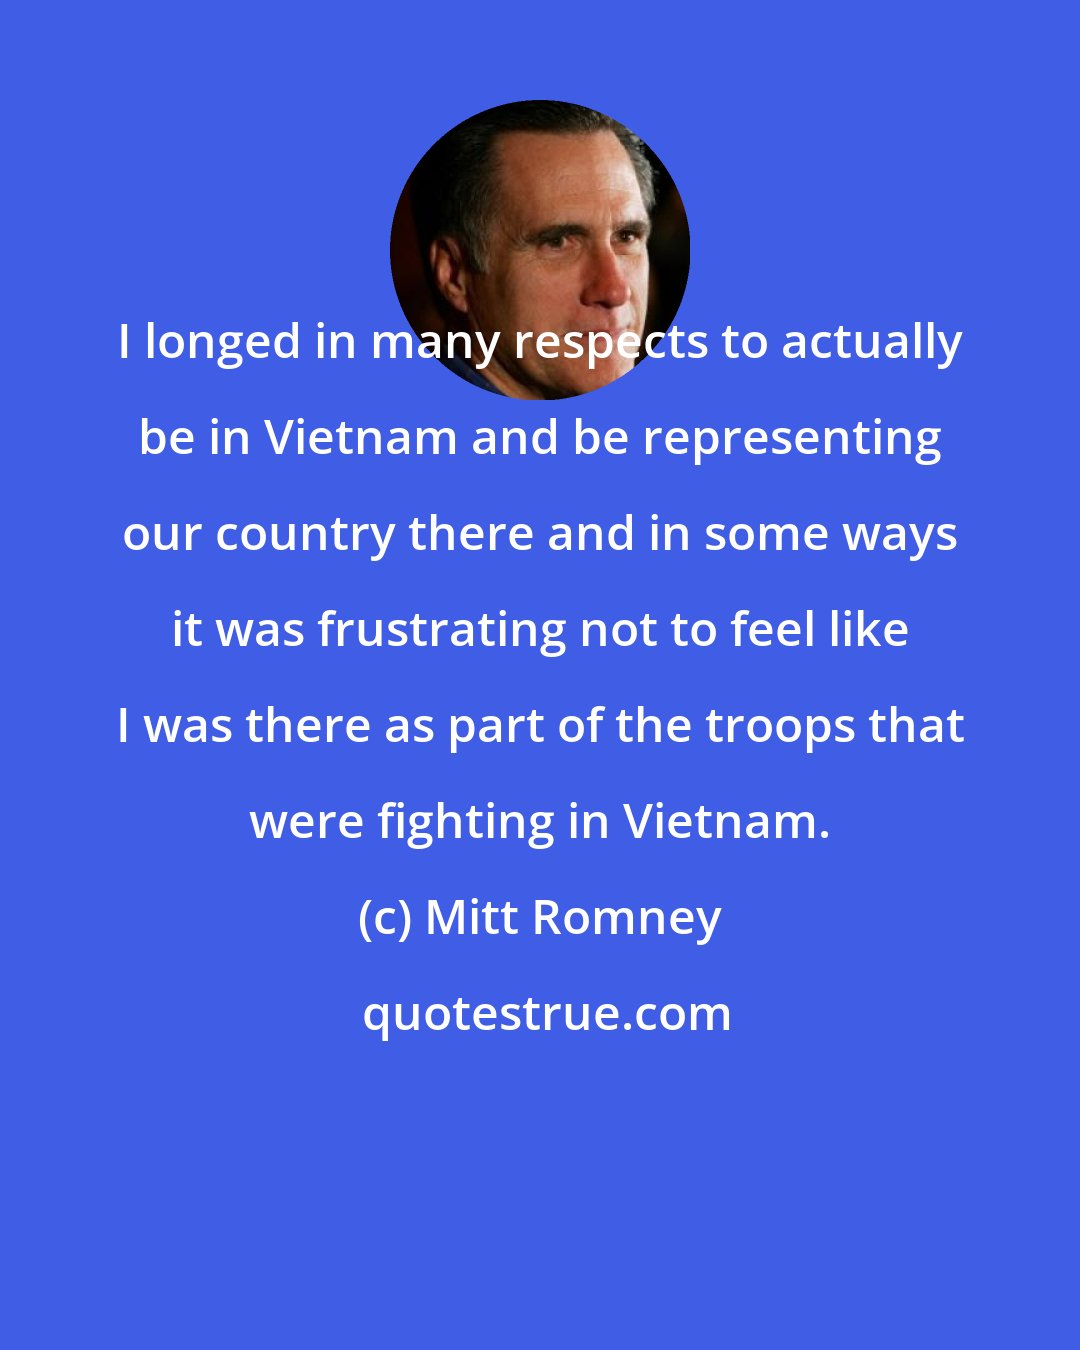 Mitt Romney: I longed in many respects to actually be in Vietnam and be representing our country there and in some ways it was frustrating not to feel like I was there as part of the troops that were fighting in Vietnam.